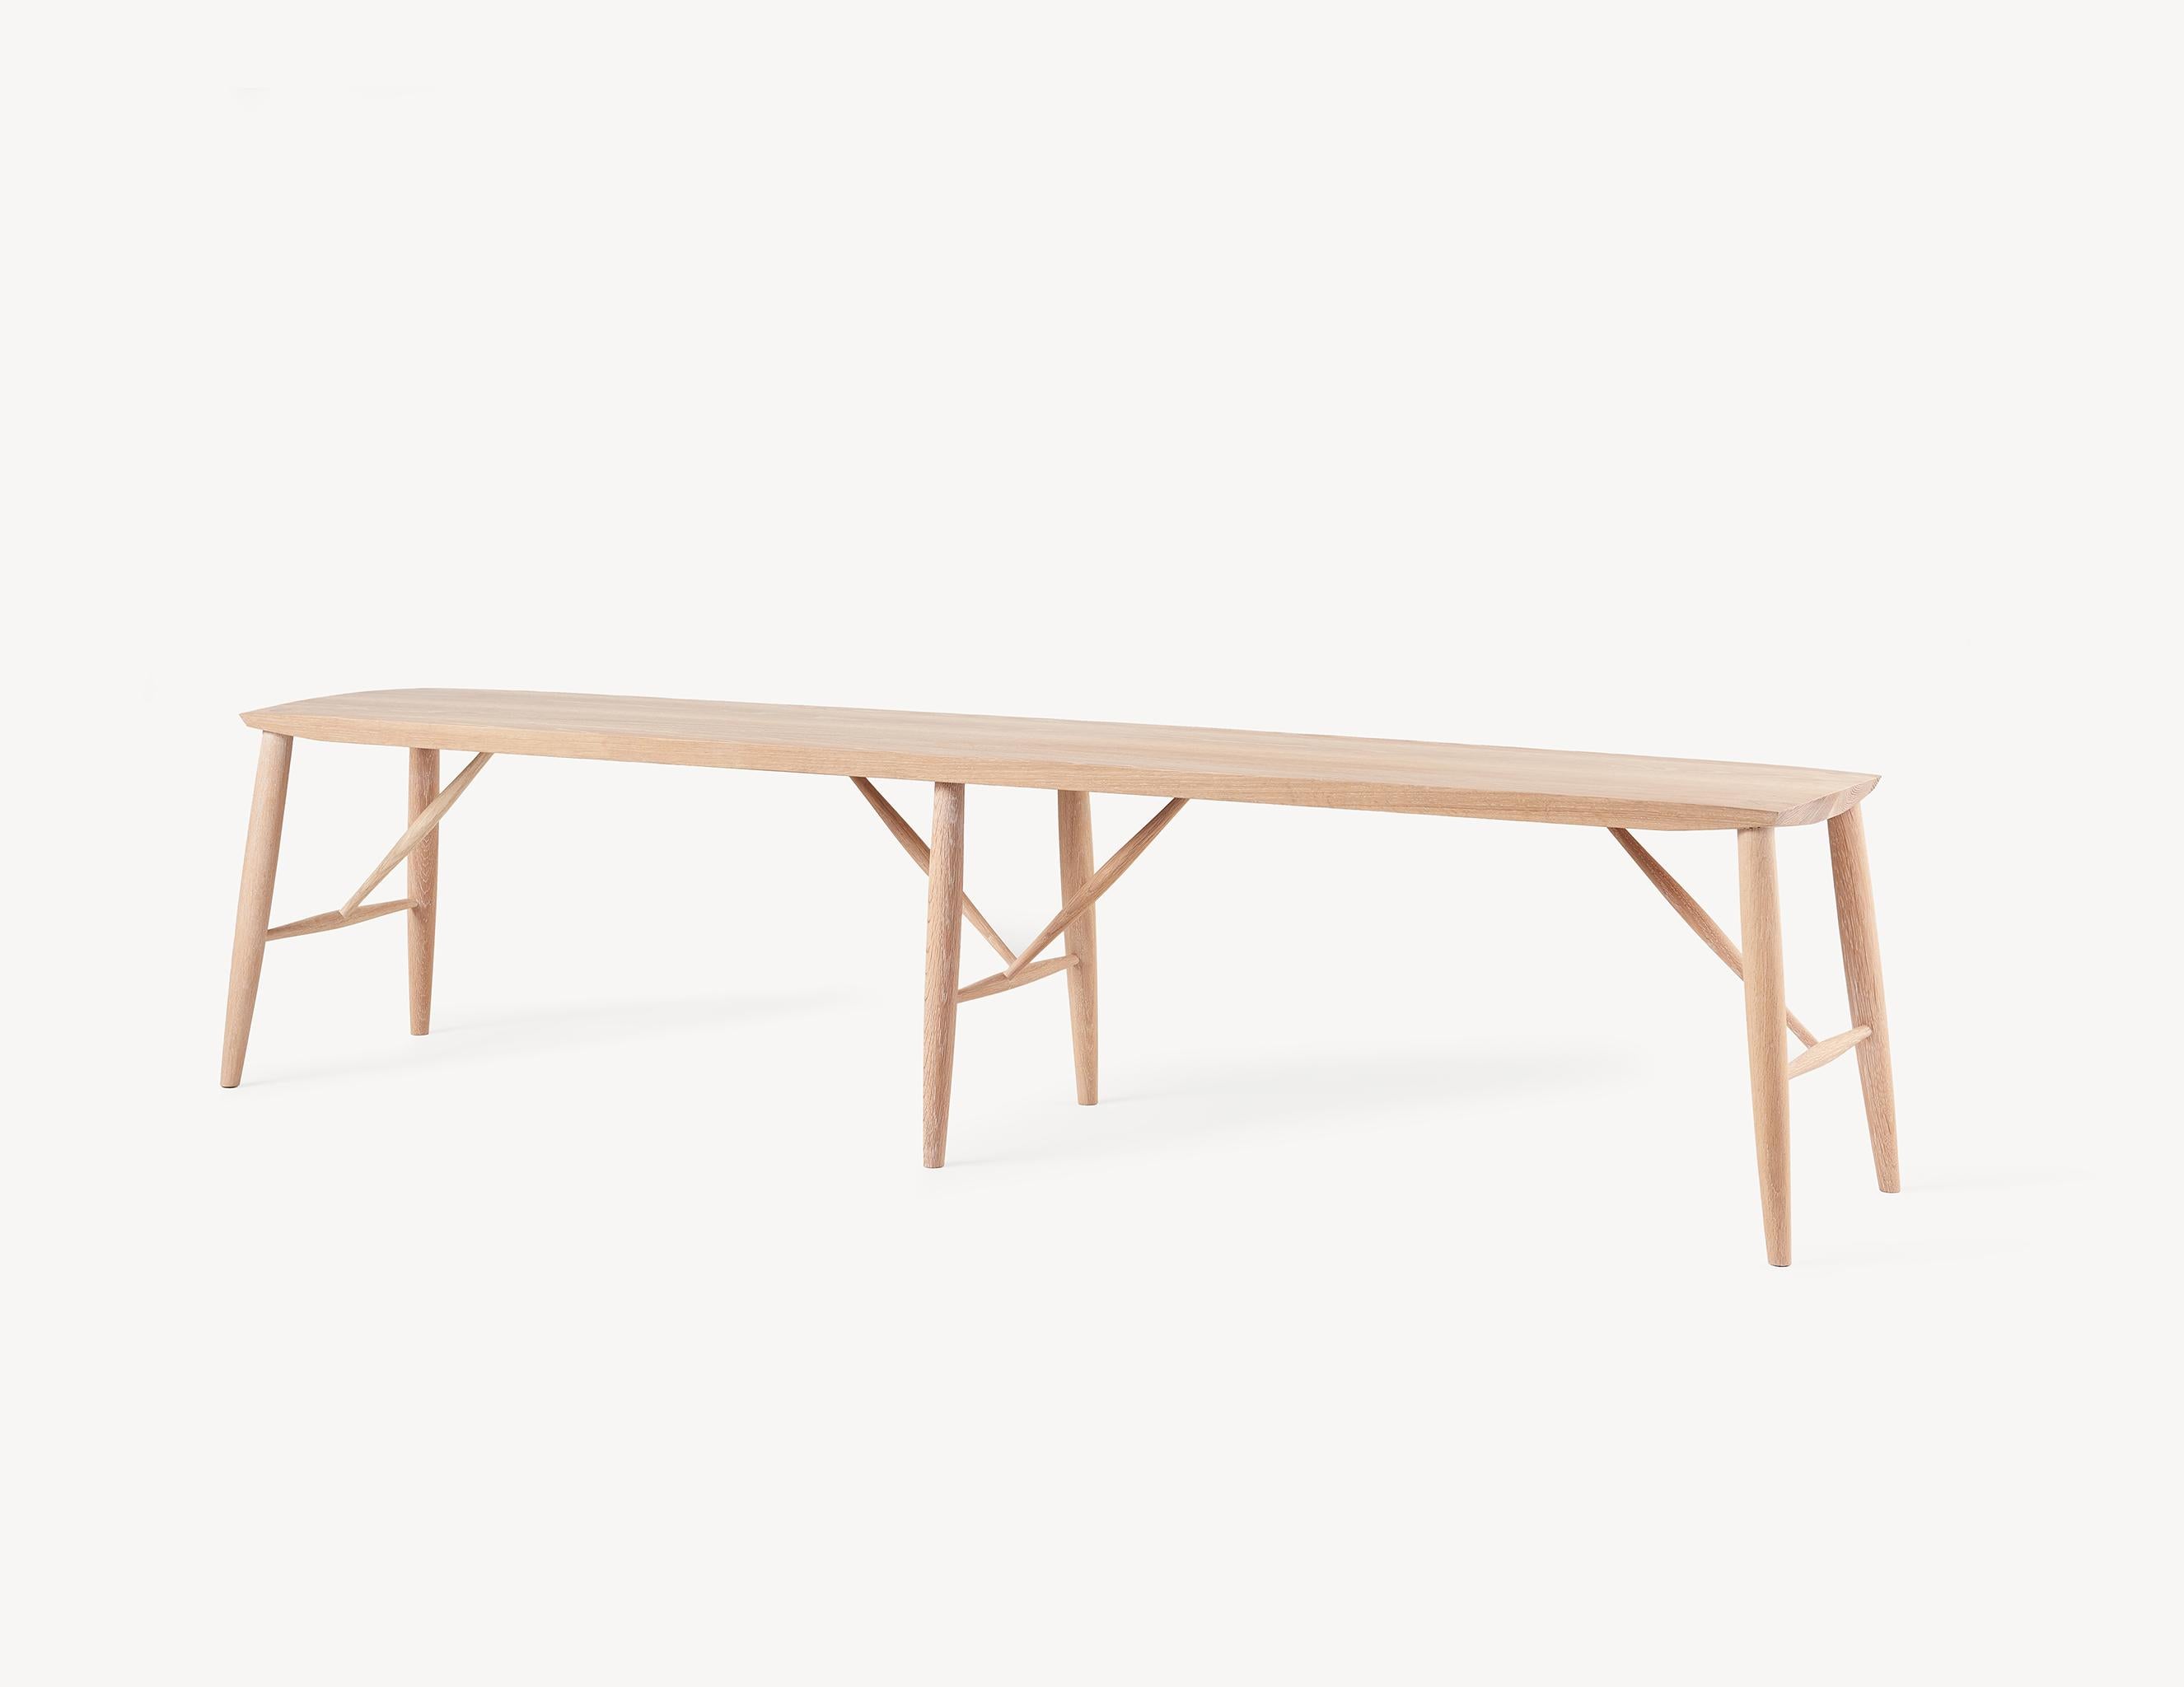 A versatile and durable bench suitable for a variety of applications including extra seating, hall entrance bench or even a narrow coffee table. The Adelaide bench is a welcome addition to any home. It is handcrafted with solid white oak and